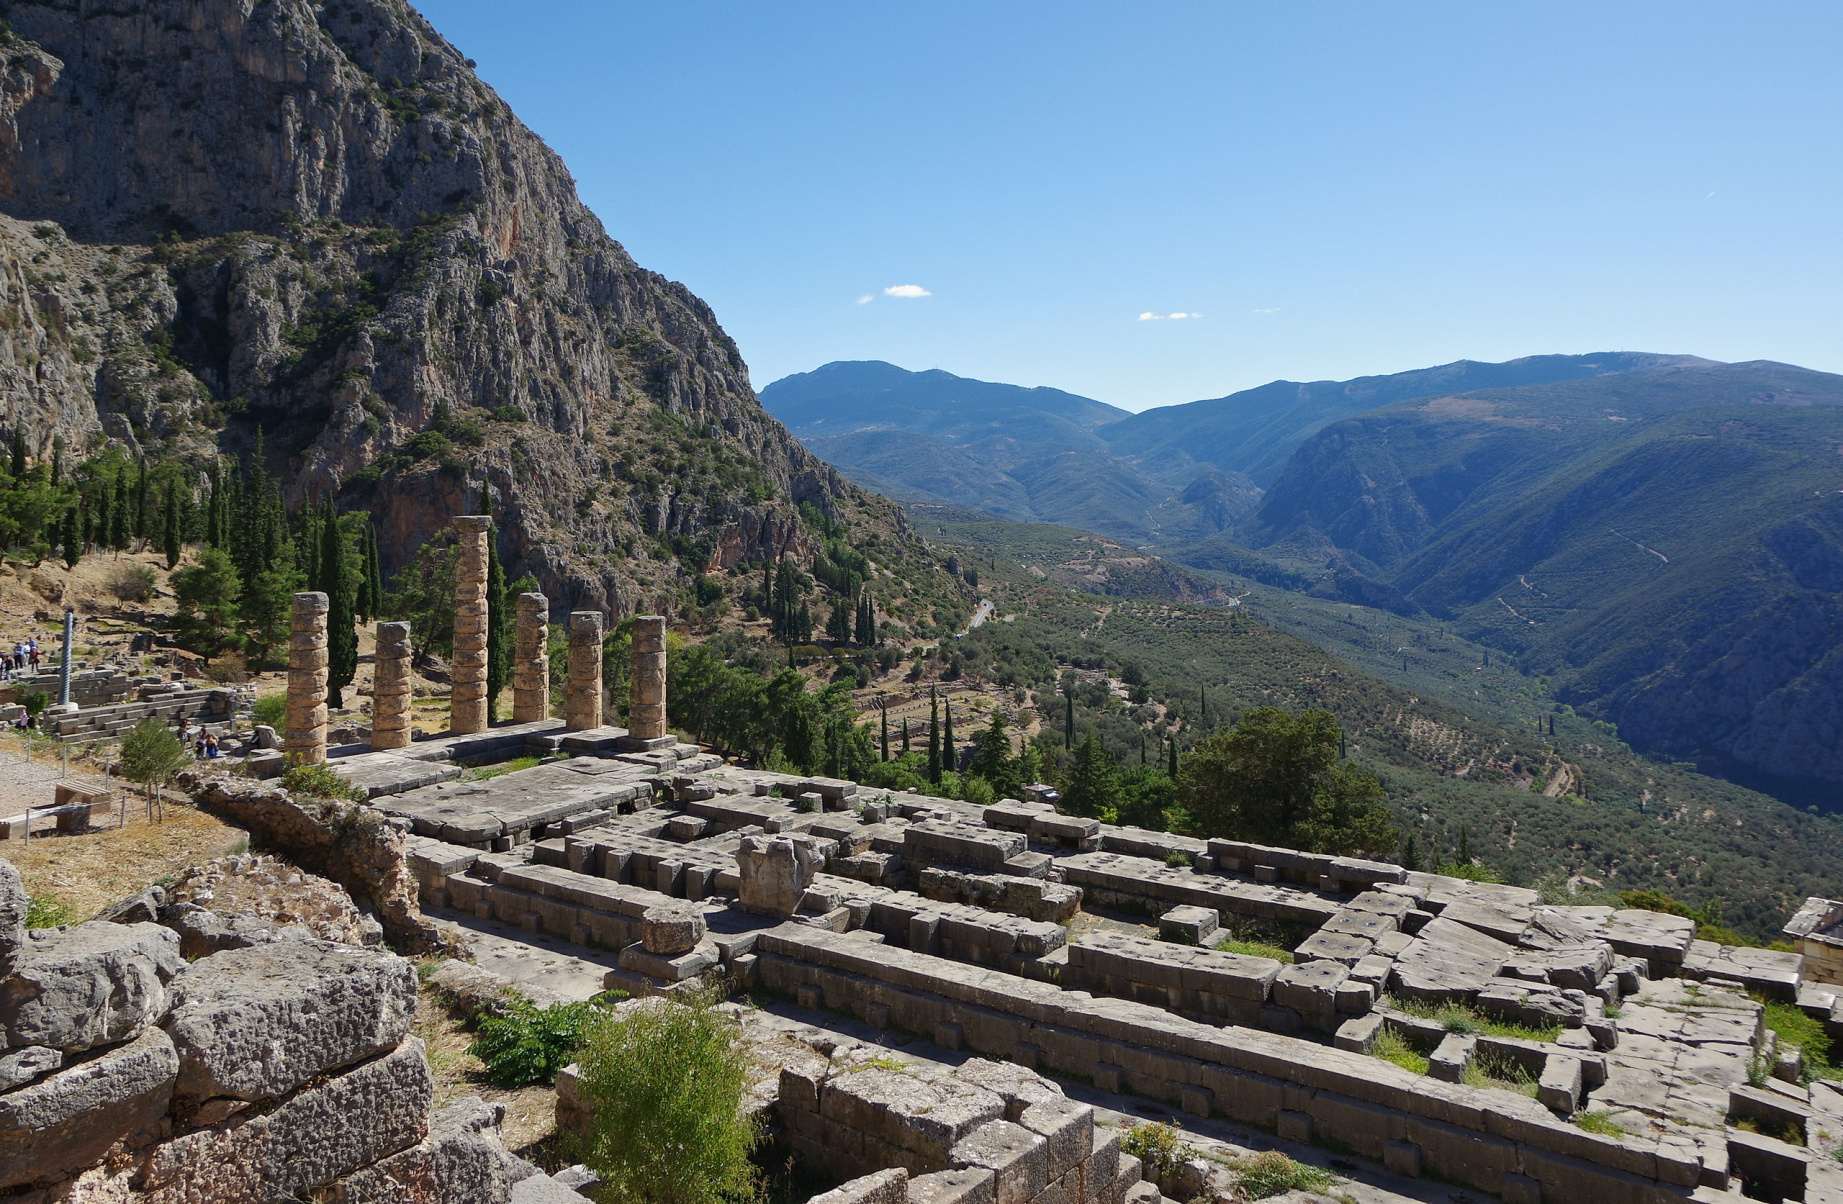 The Temple of Apollo/Delphi, where Themistoclea lived and taught Pythagoras his ways.